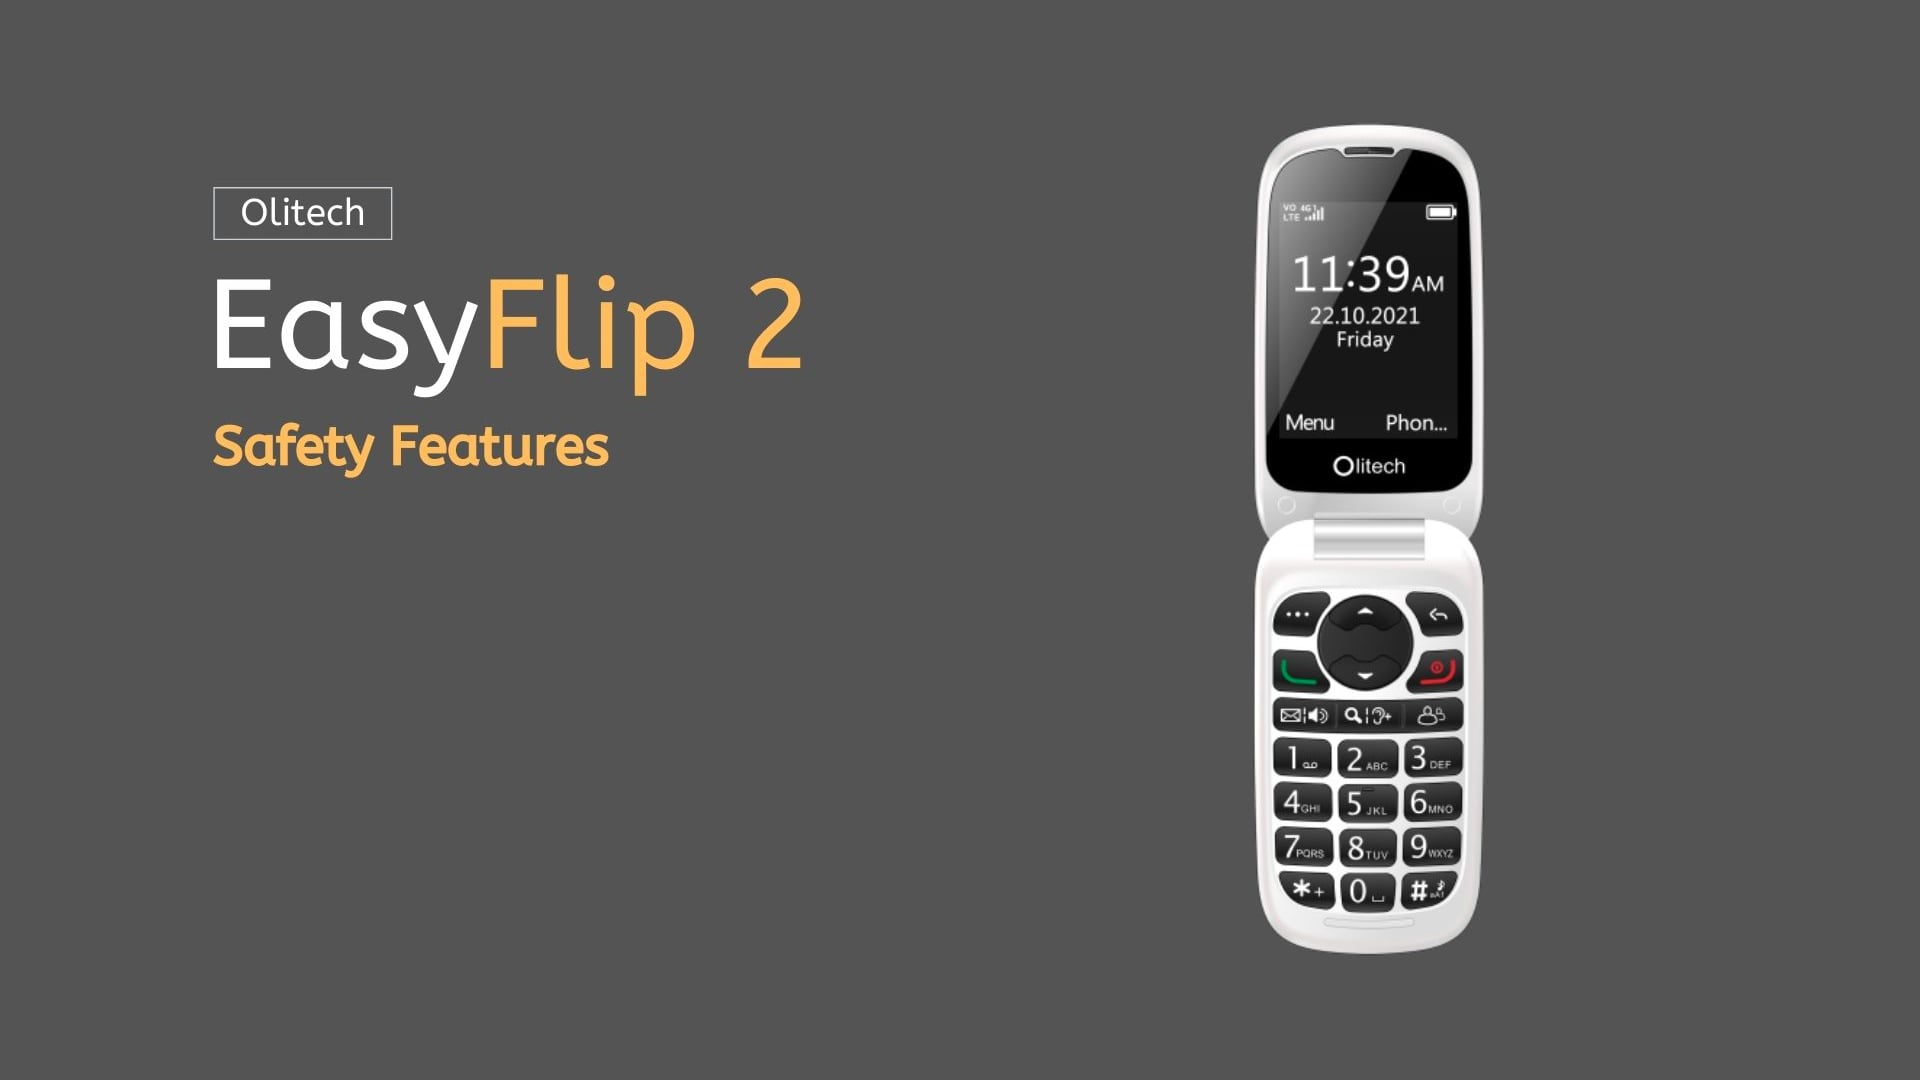 Olitech EasyFlip 2 - Safety Features